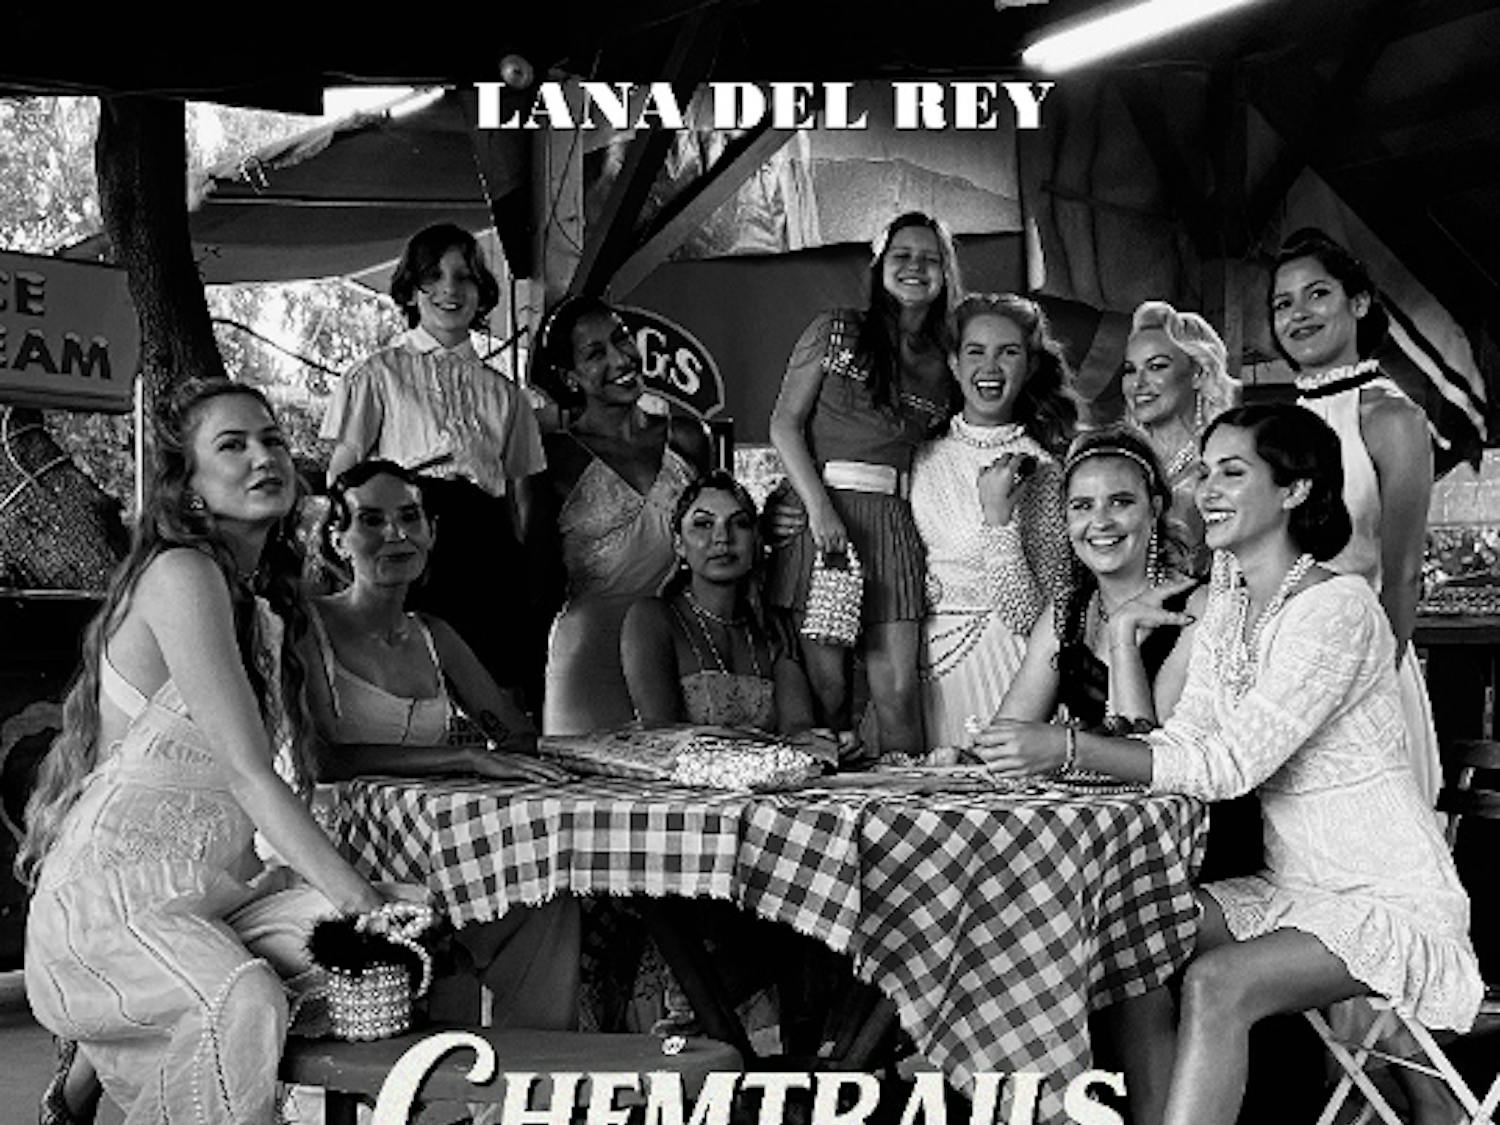 “Chemtrails Over The Country Club” is many things — a love letter to American music tradition, a reflection on Del Rey’s fame and a profoundly intimate album largely inspired by Del Rey’s “stunning girlfriends” and “beautiful siblings.”